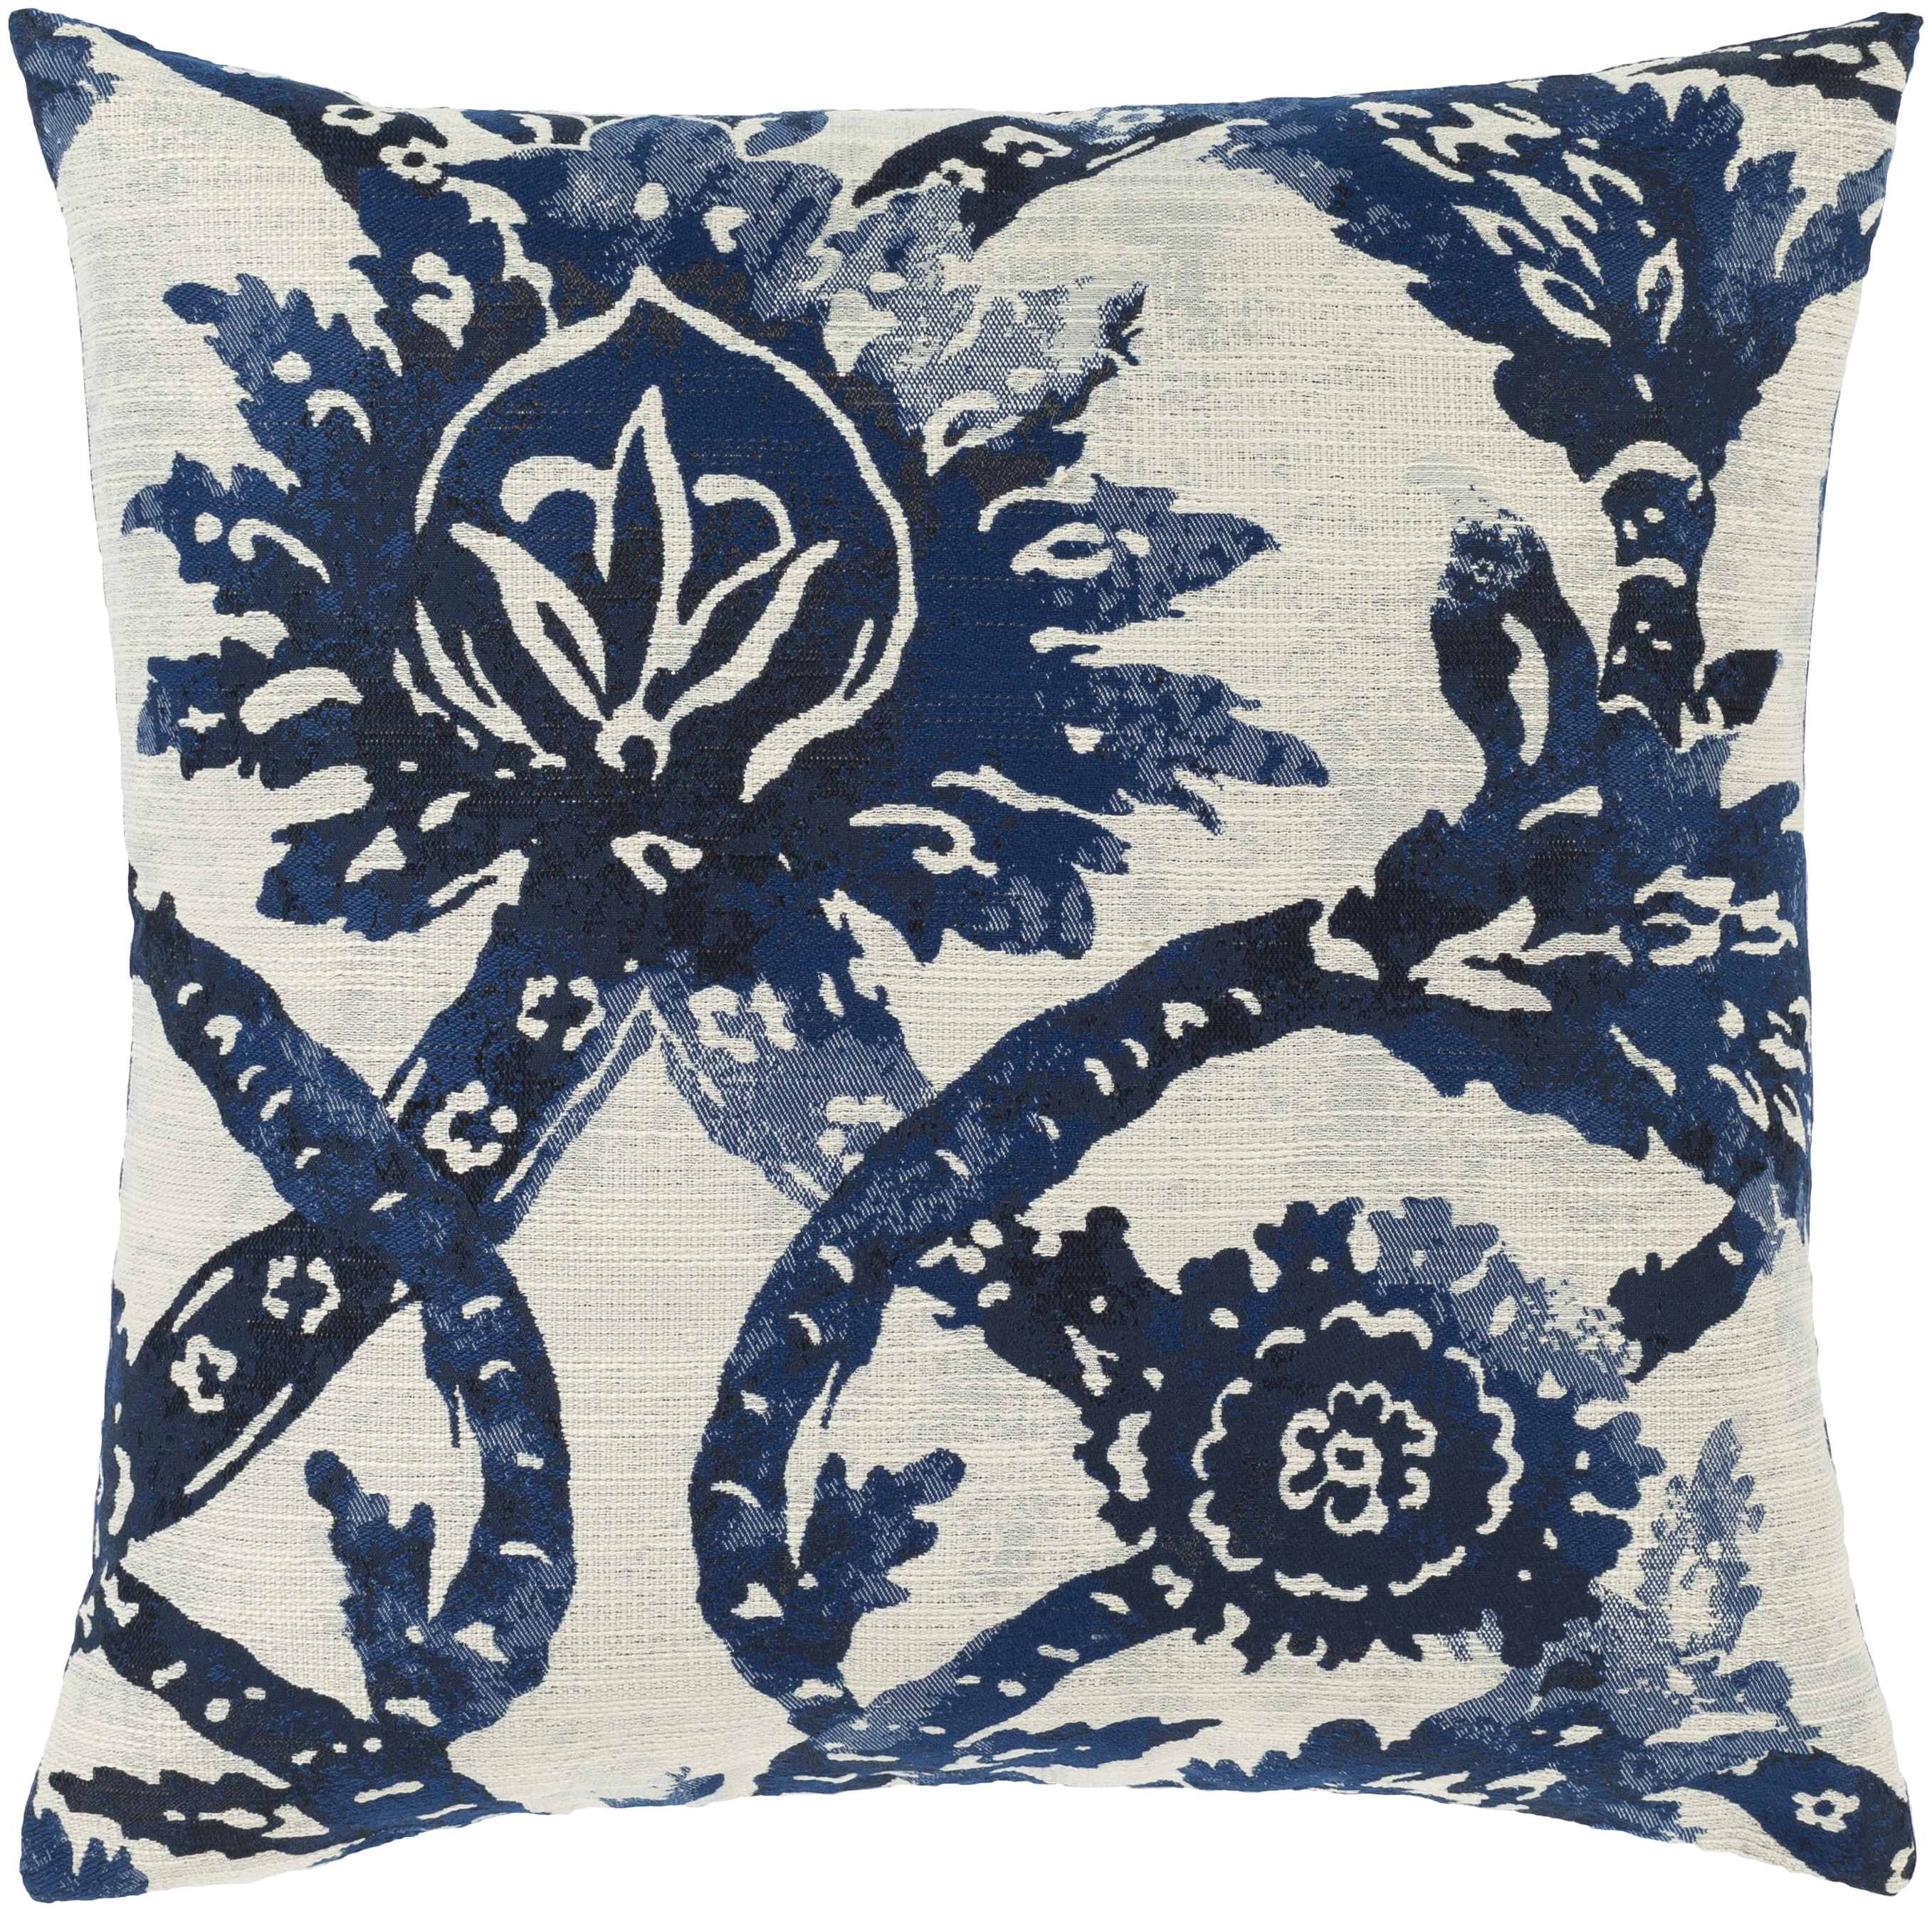 Sanya Bay Throw Pillow, 20" x 20", with down insert - Image 0